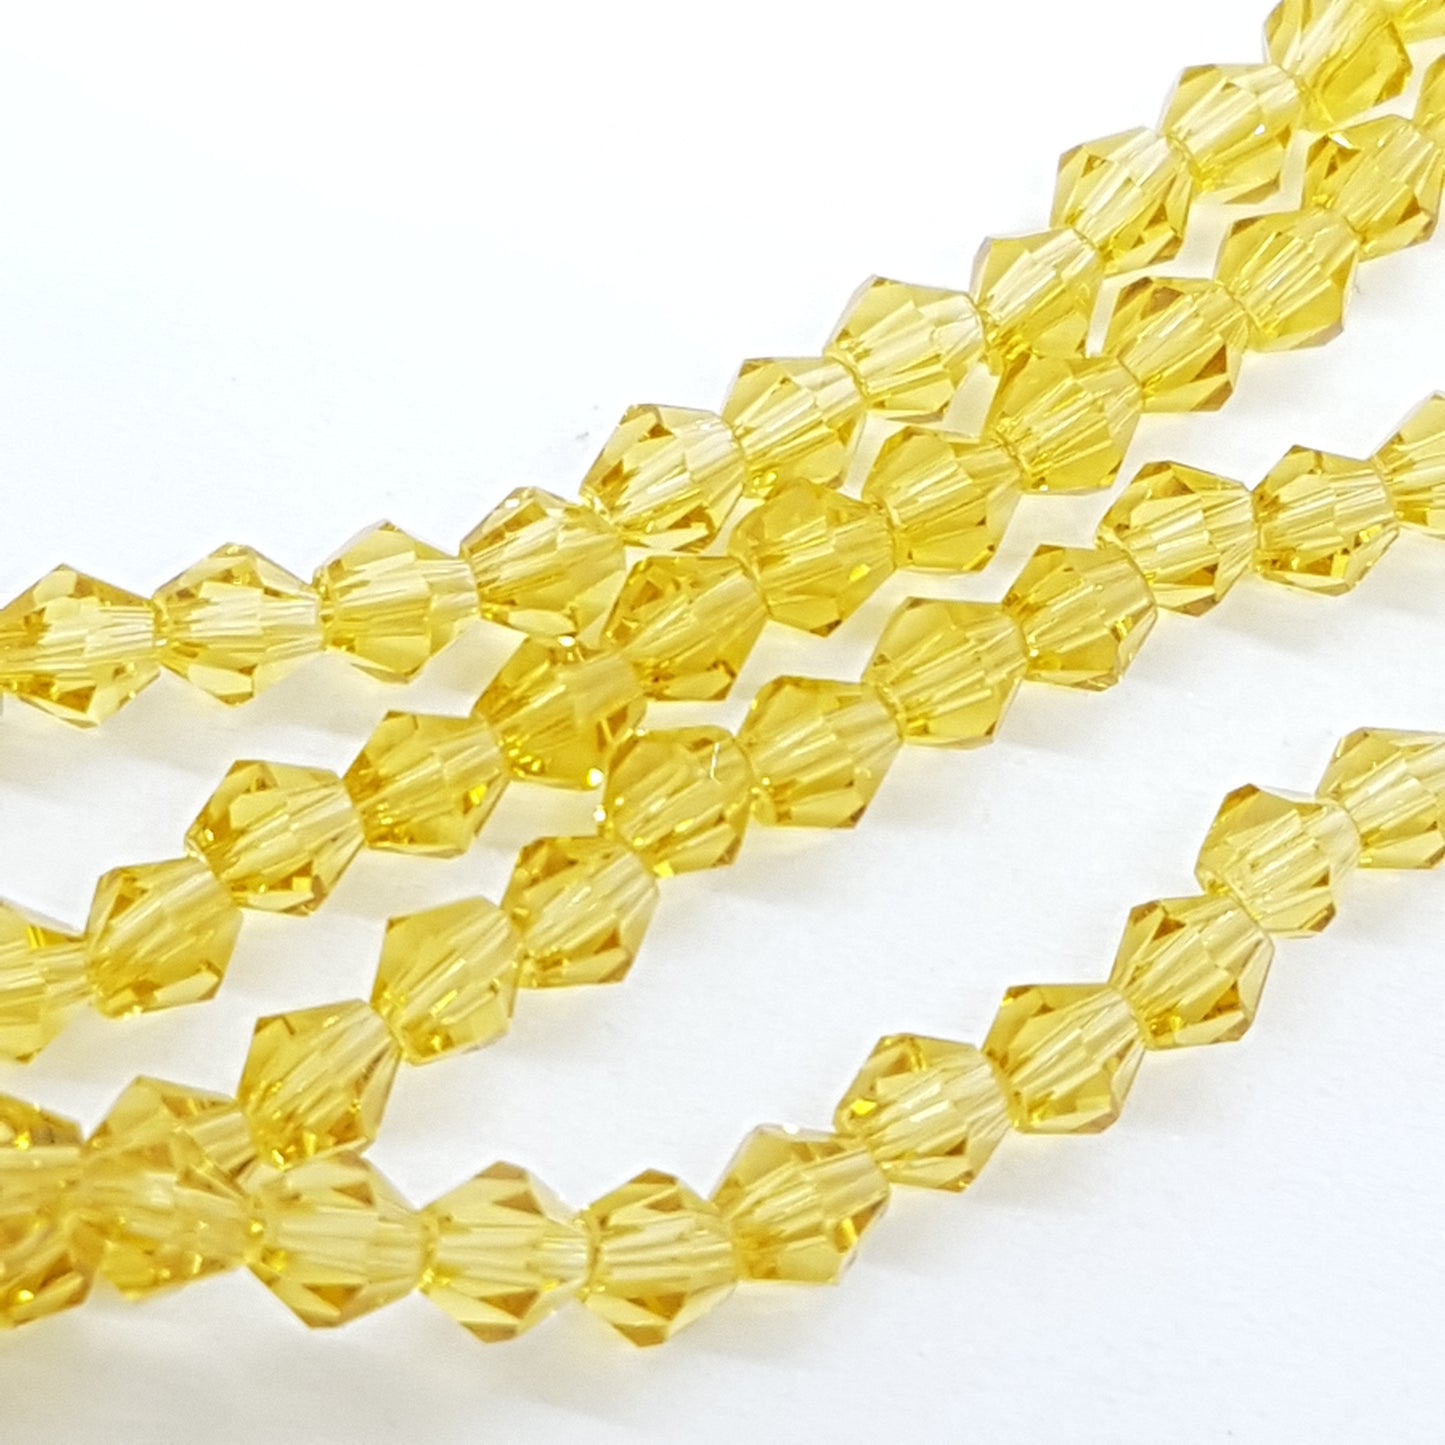 4mm Yellow Gold Crystal Glass Bicones